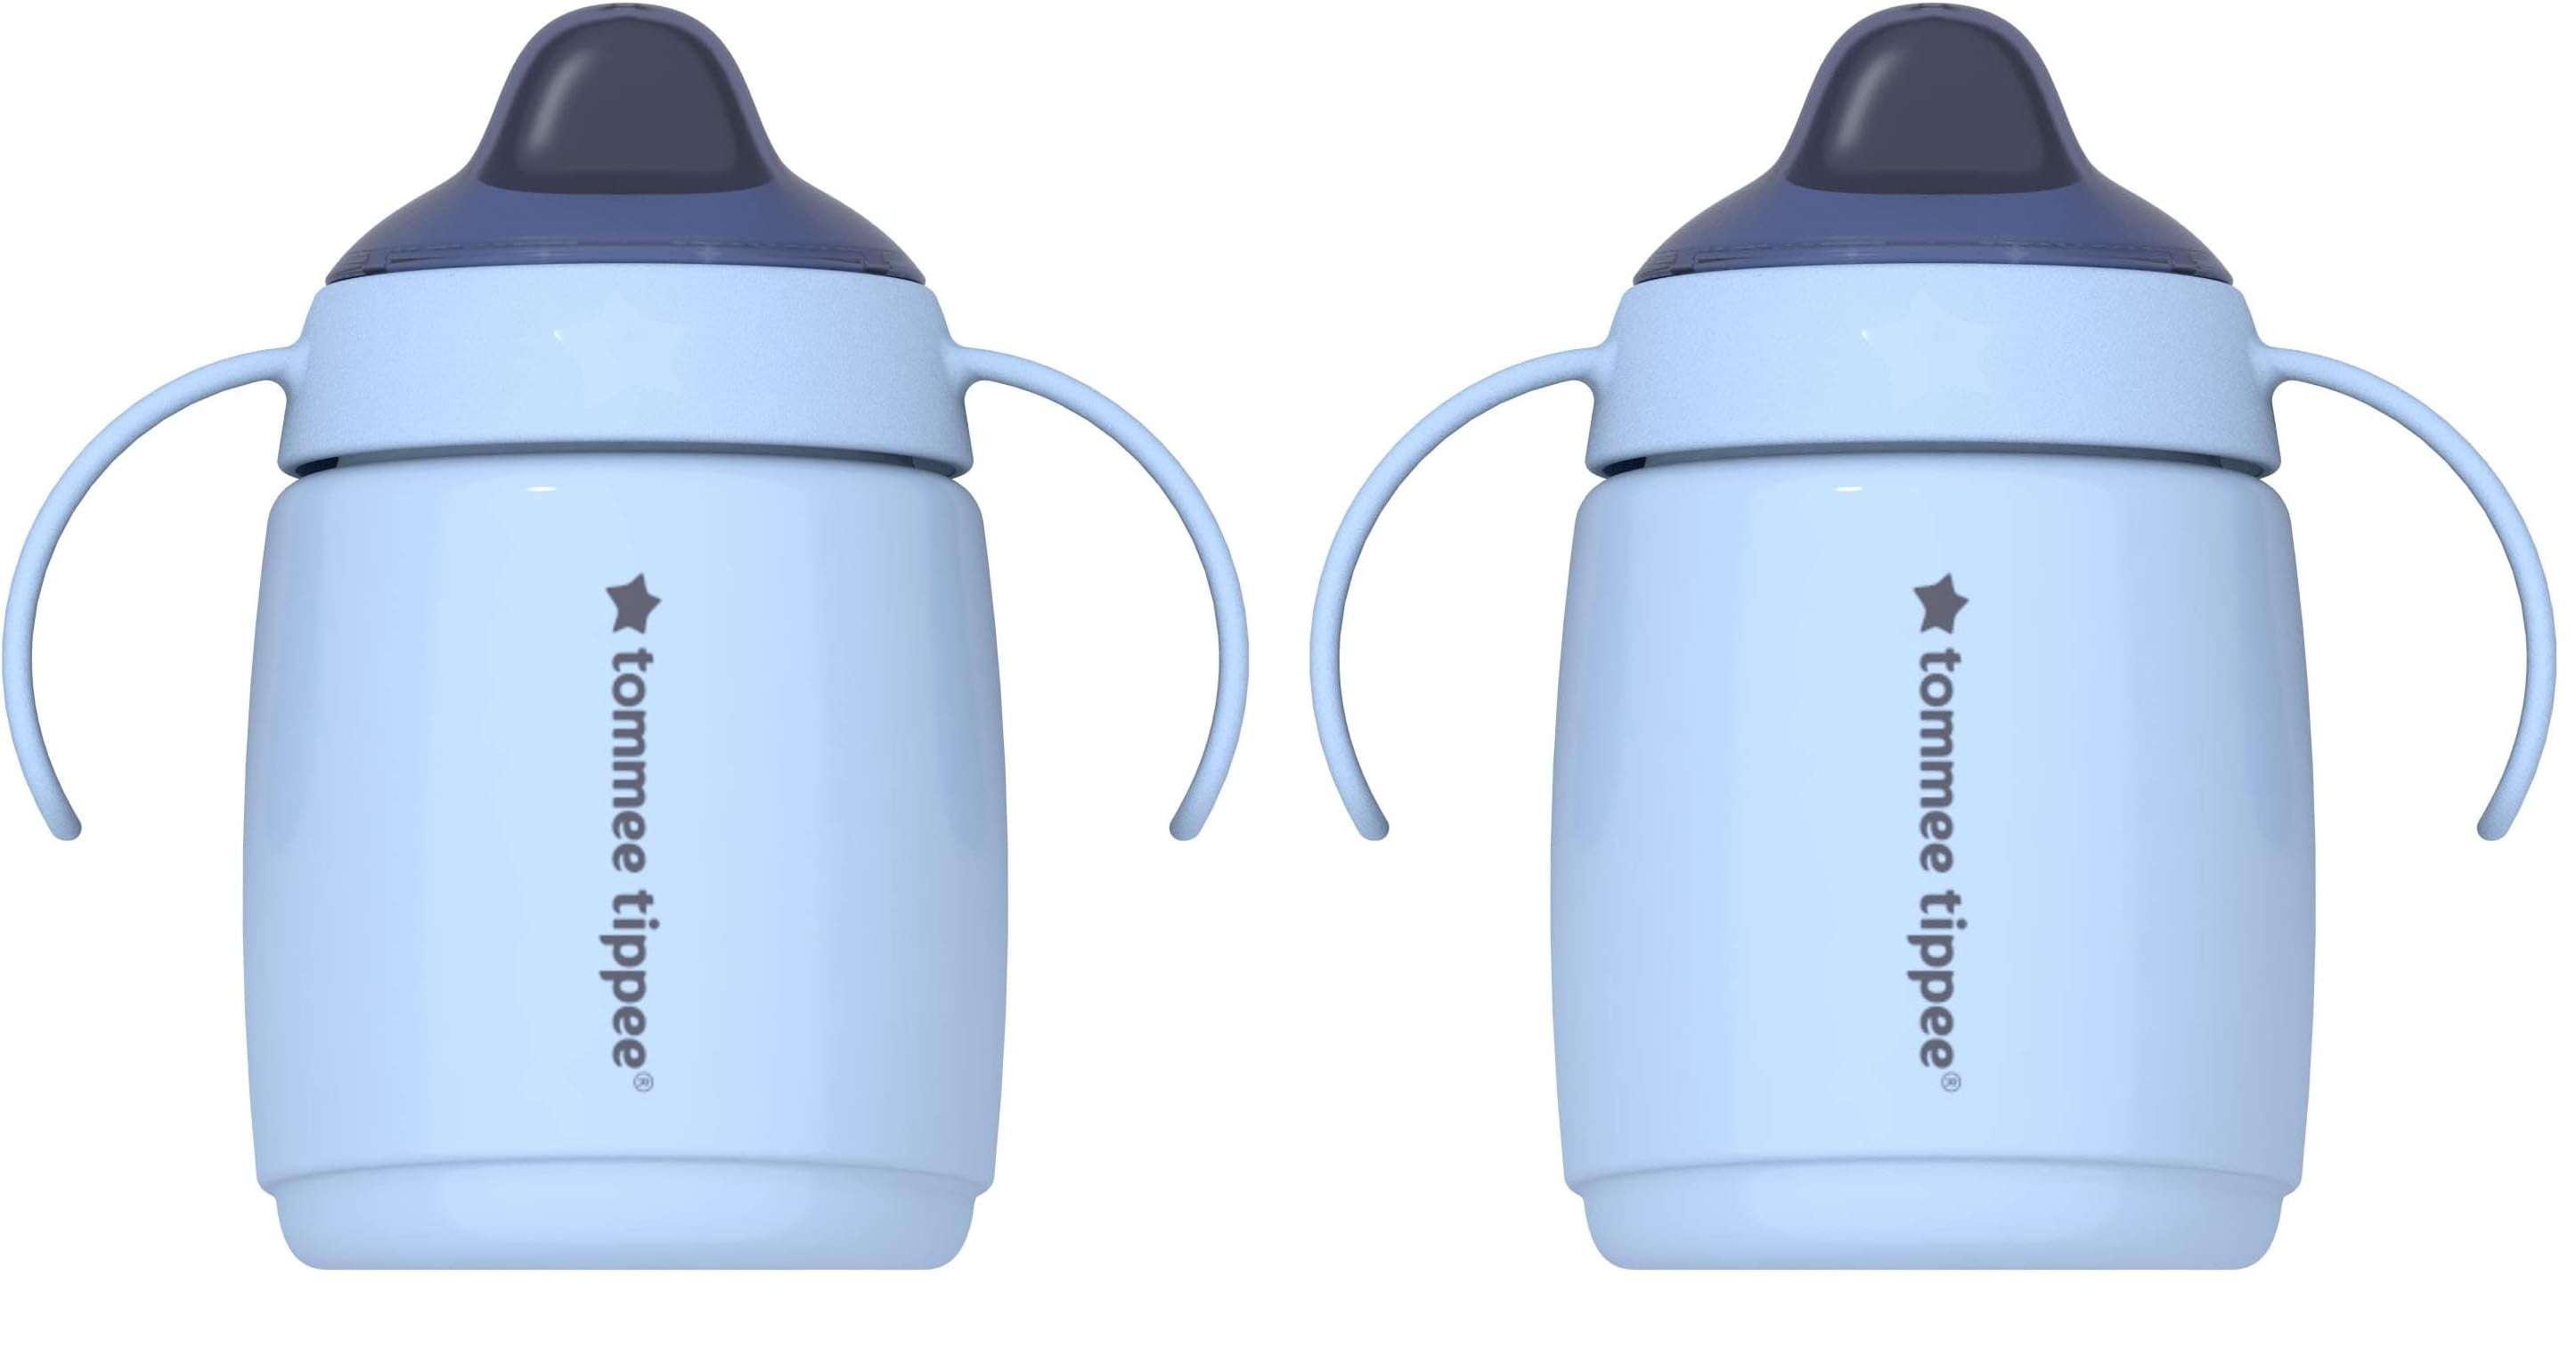 Tommee Tippee® Tumbler Sipper Sippy Cup, 1 ct - Food 4 Less